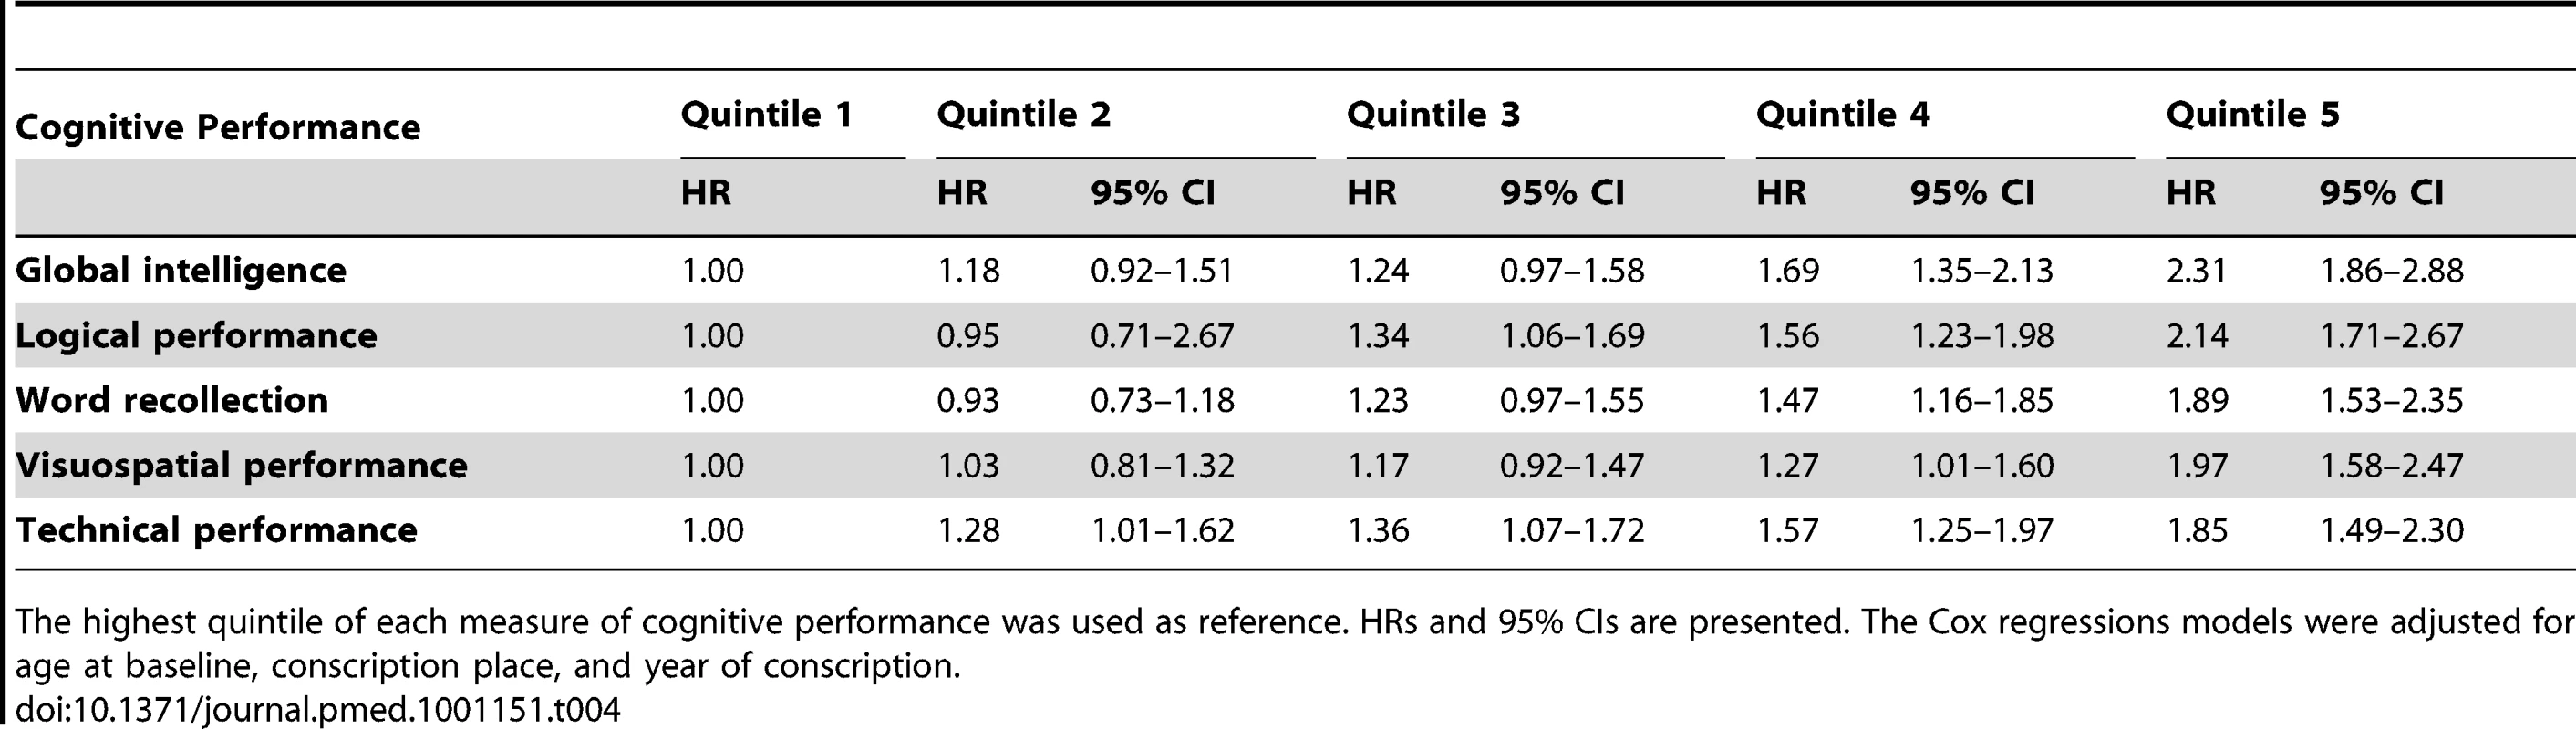 The risk of SDH for quintiles of cognitive performance.